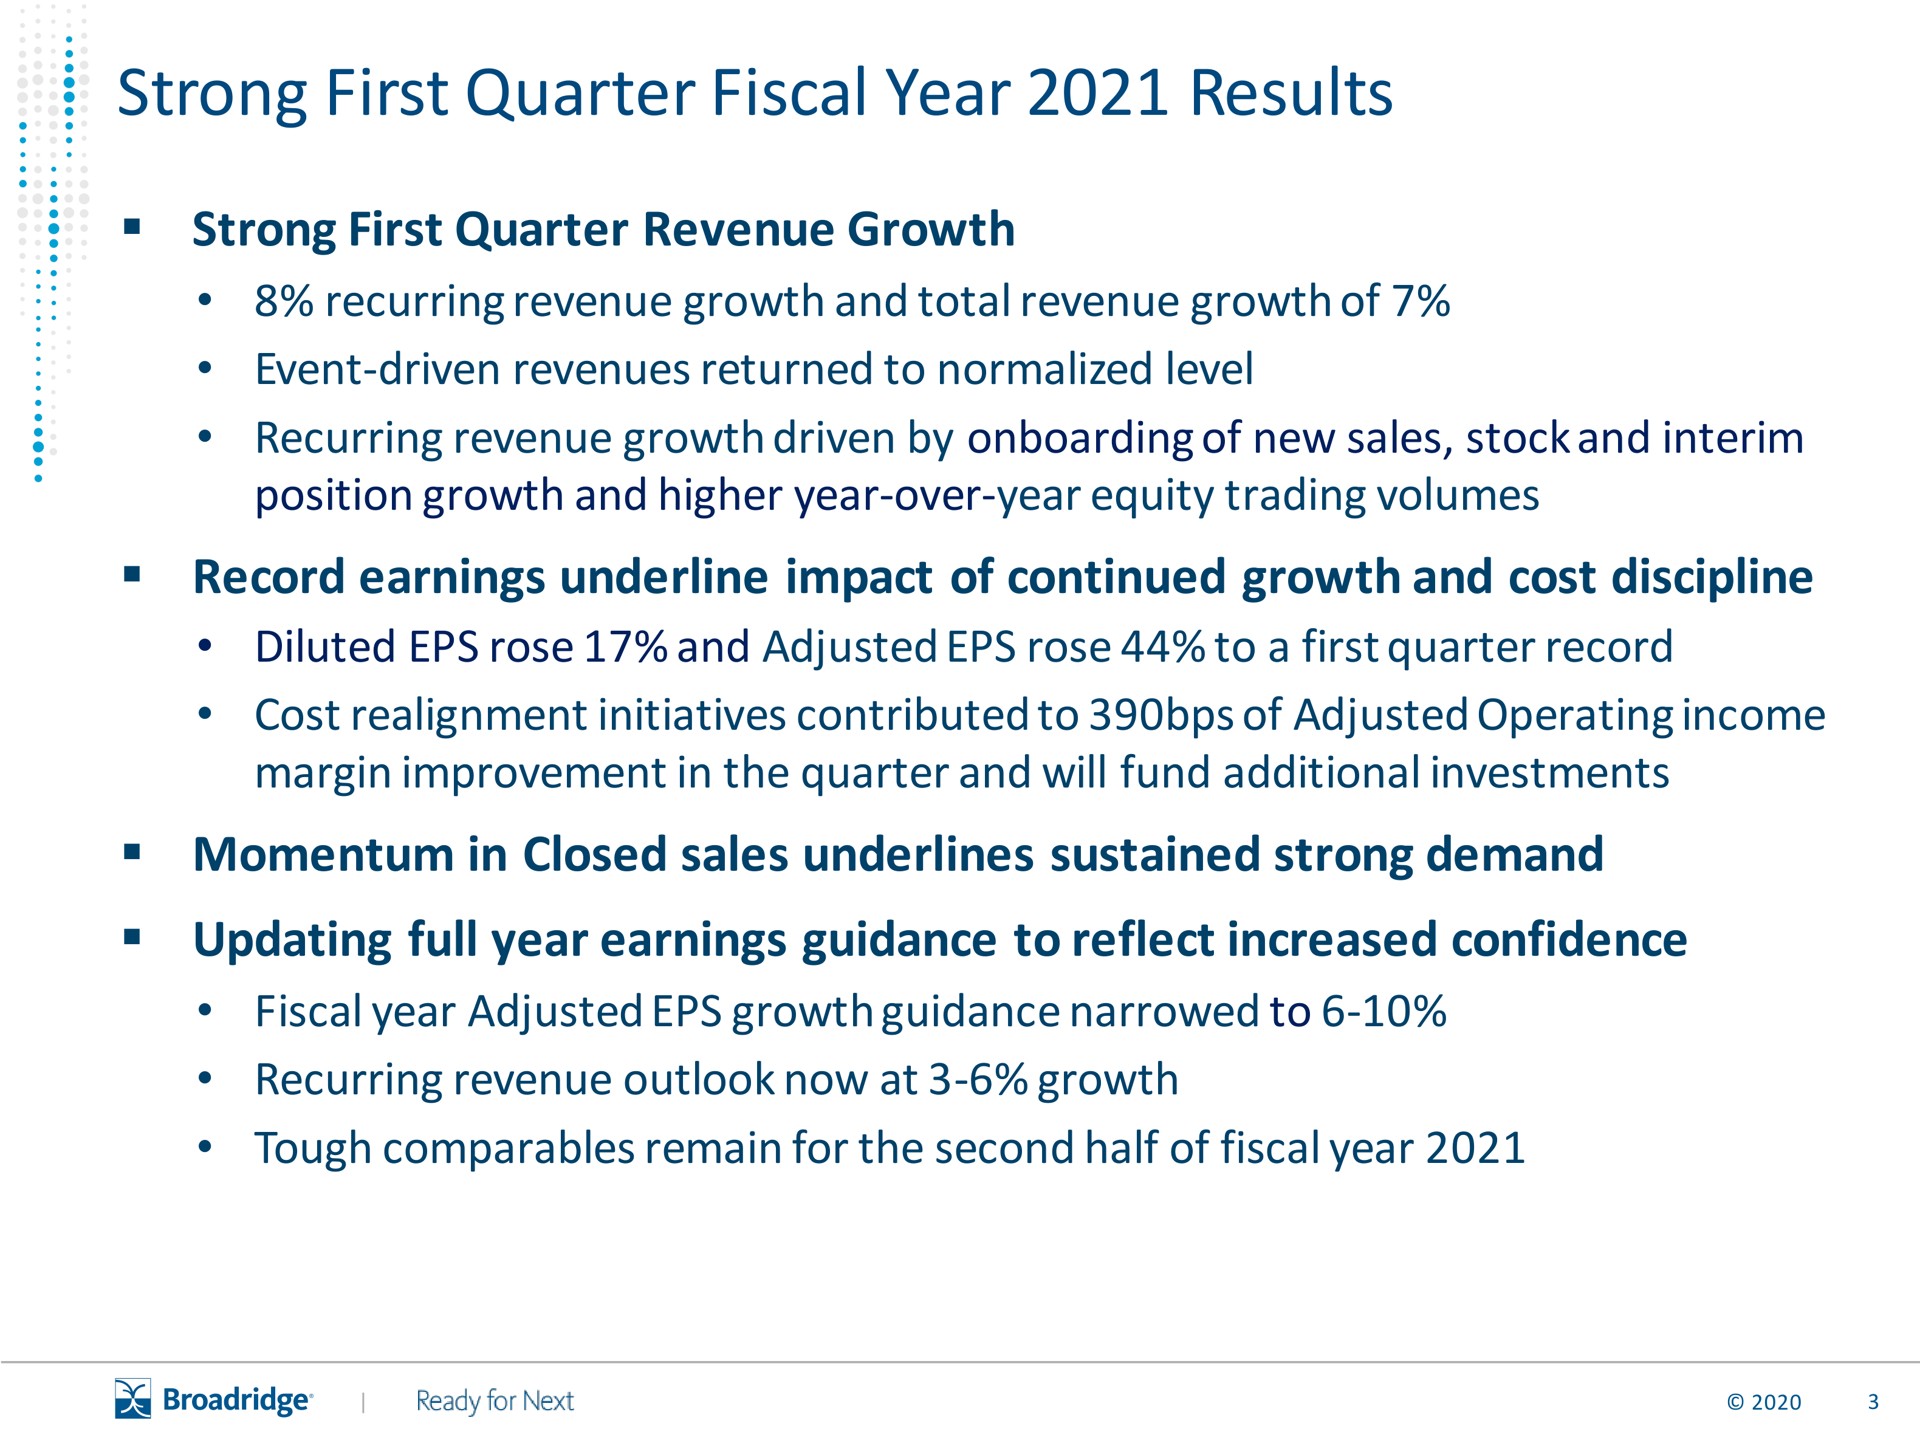 strong first quarter fiscal year results | Broadridge Financial Solutions